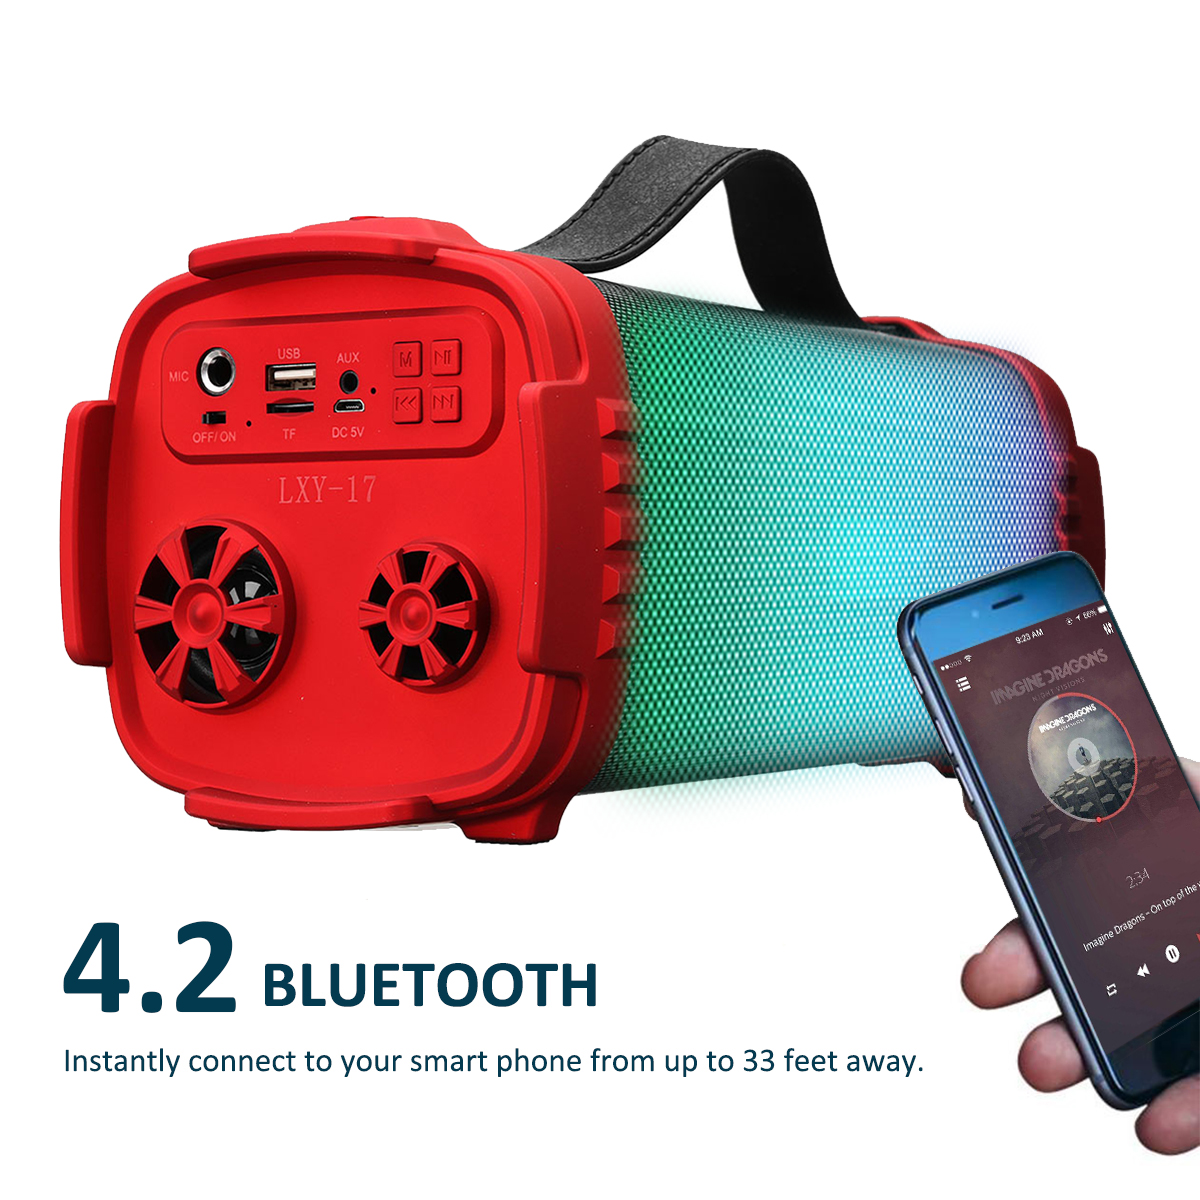 Portable-Wireless-bluetooth-Speaker-Colorful-LED-Light-Outdoor-Stereo-Bass-FM-Radio-TF-Card-Speaker-1388743-3